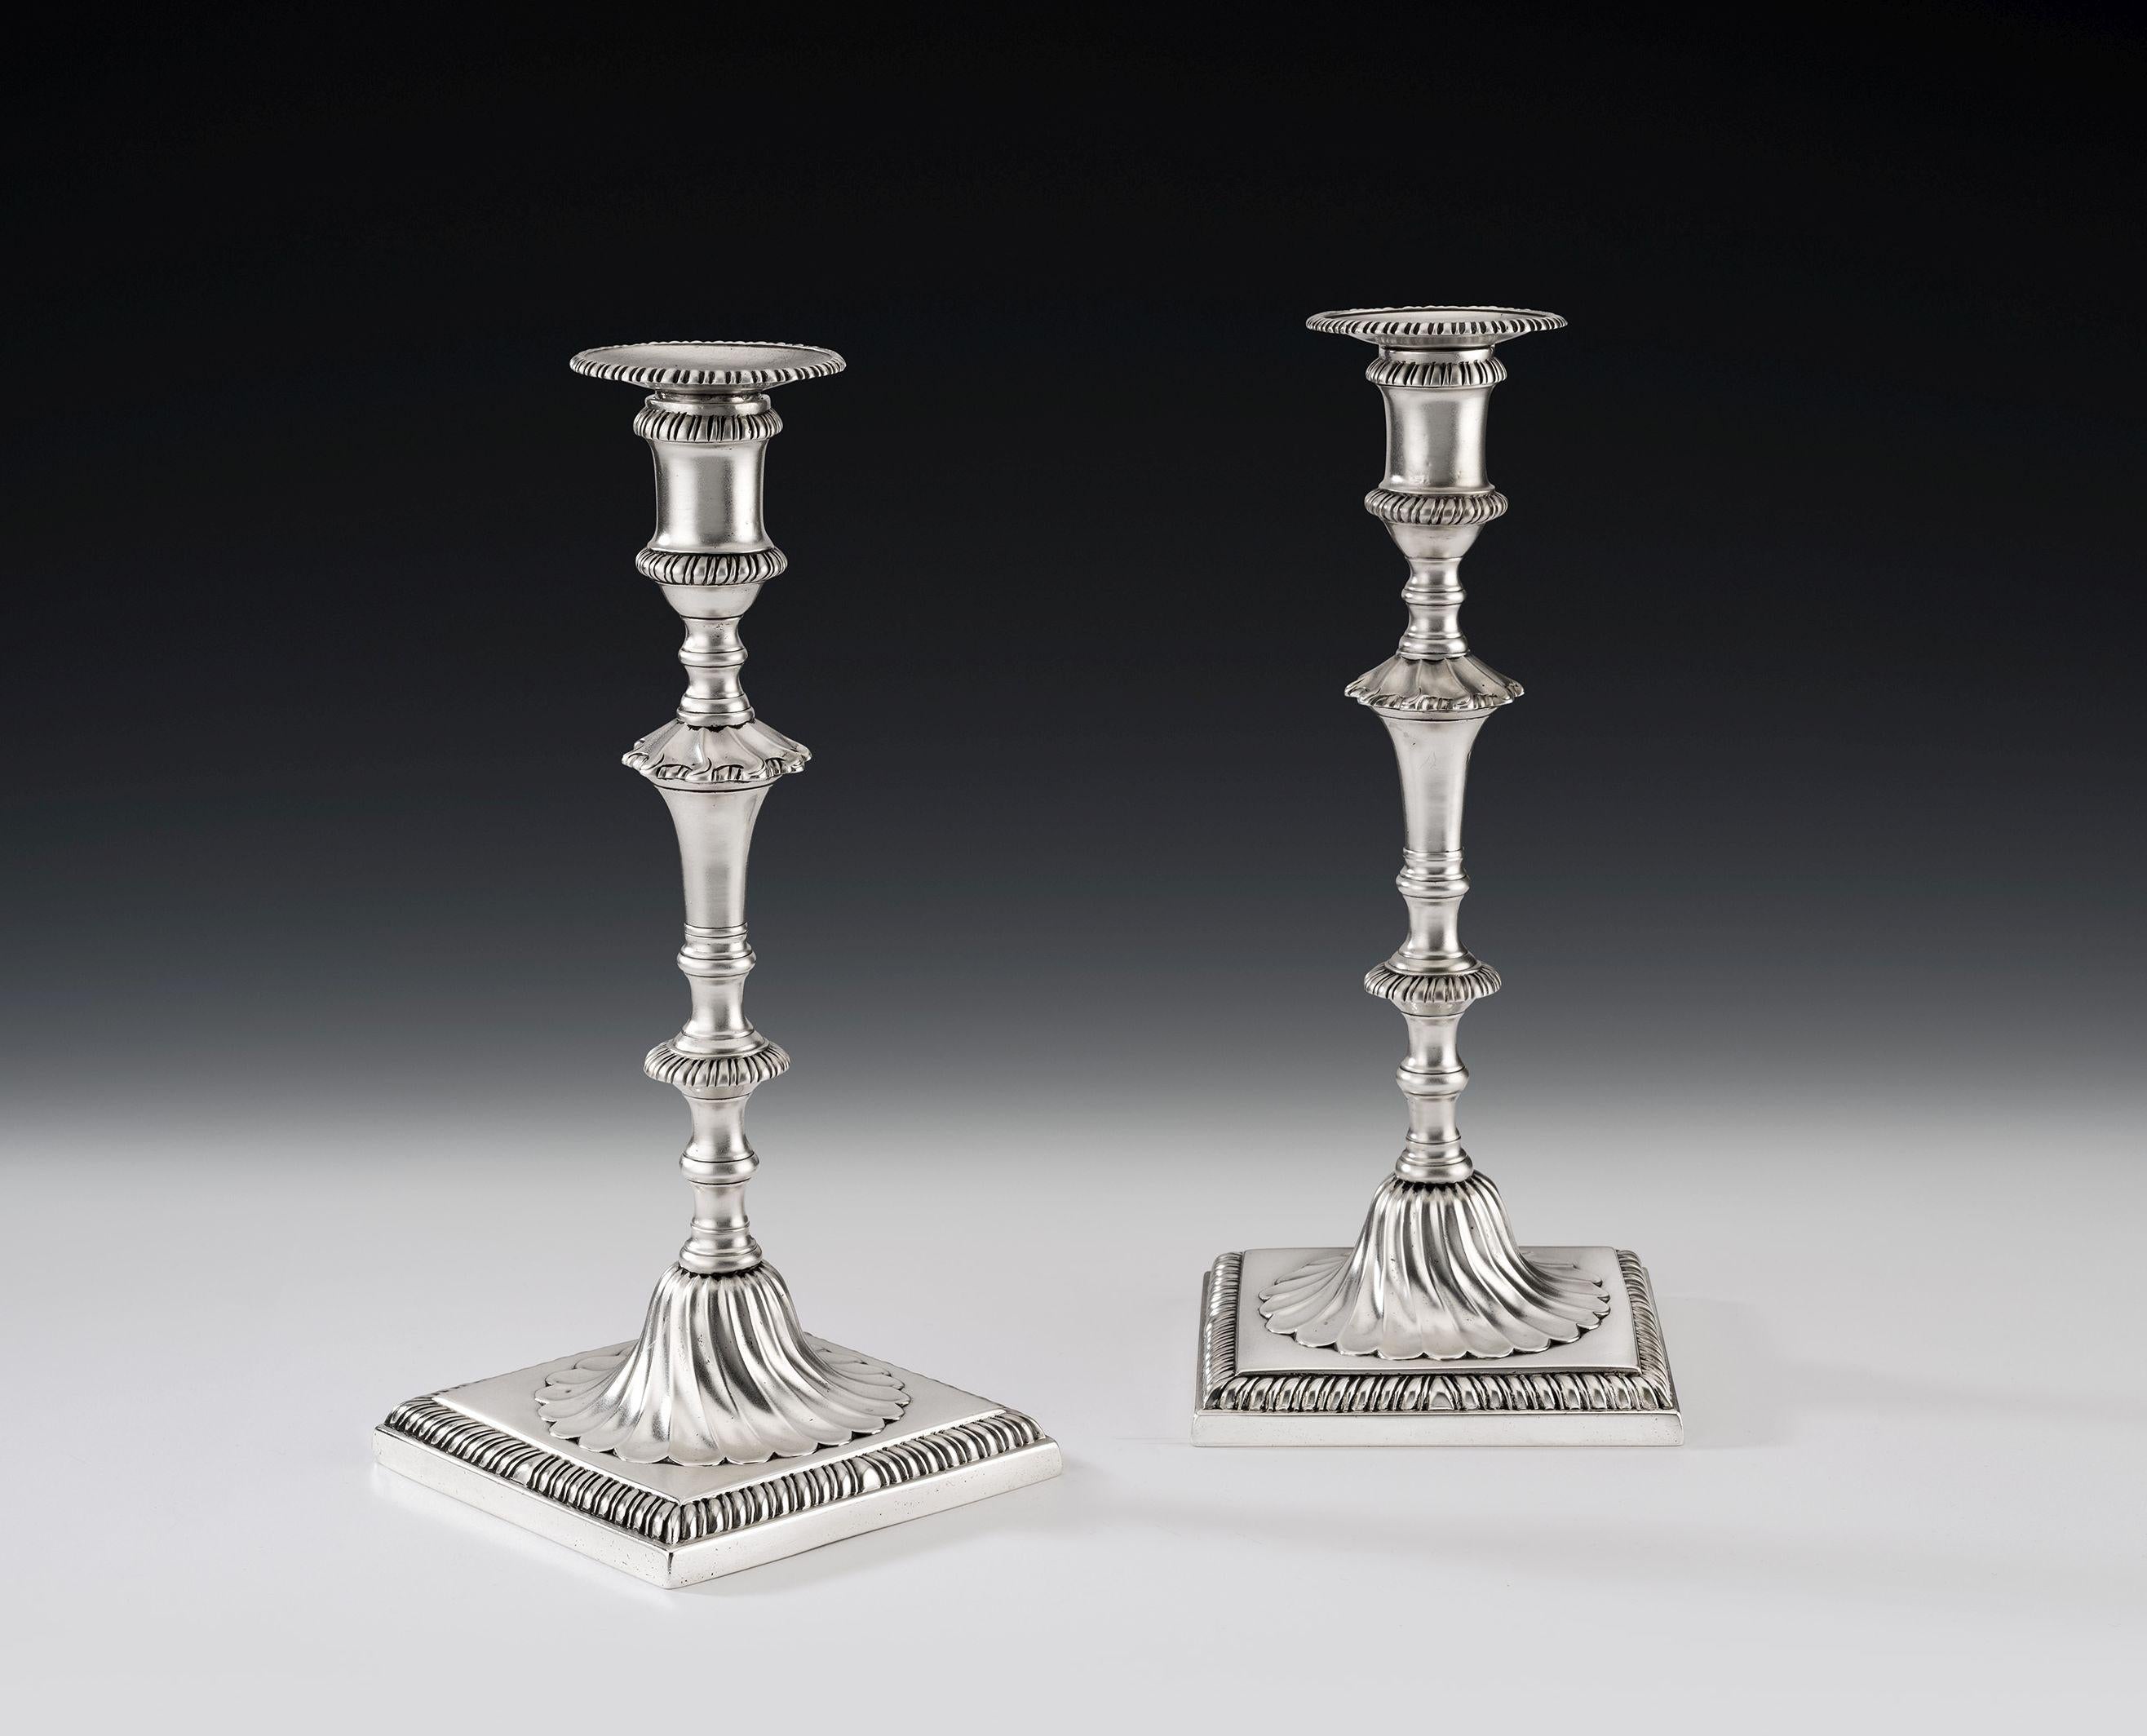 The candlesticks are cast and stand on a square foot decorated with gadrooning. The base displays an unusual domed section decorated with swirl flat fluting and rises to a shaped baluster shaft decorated with gadrooned bands and swirl flat fluting.